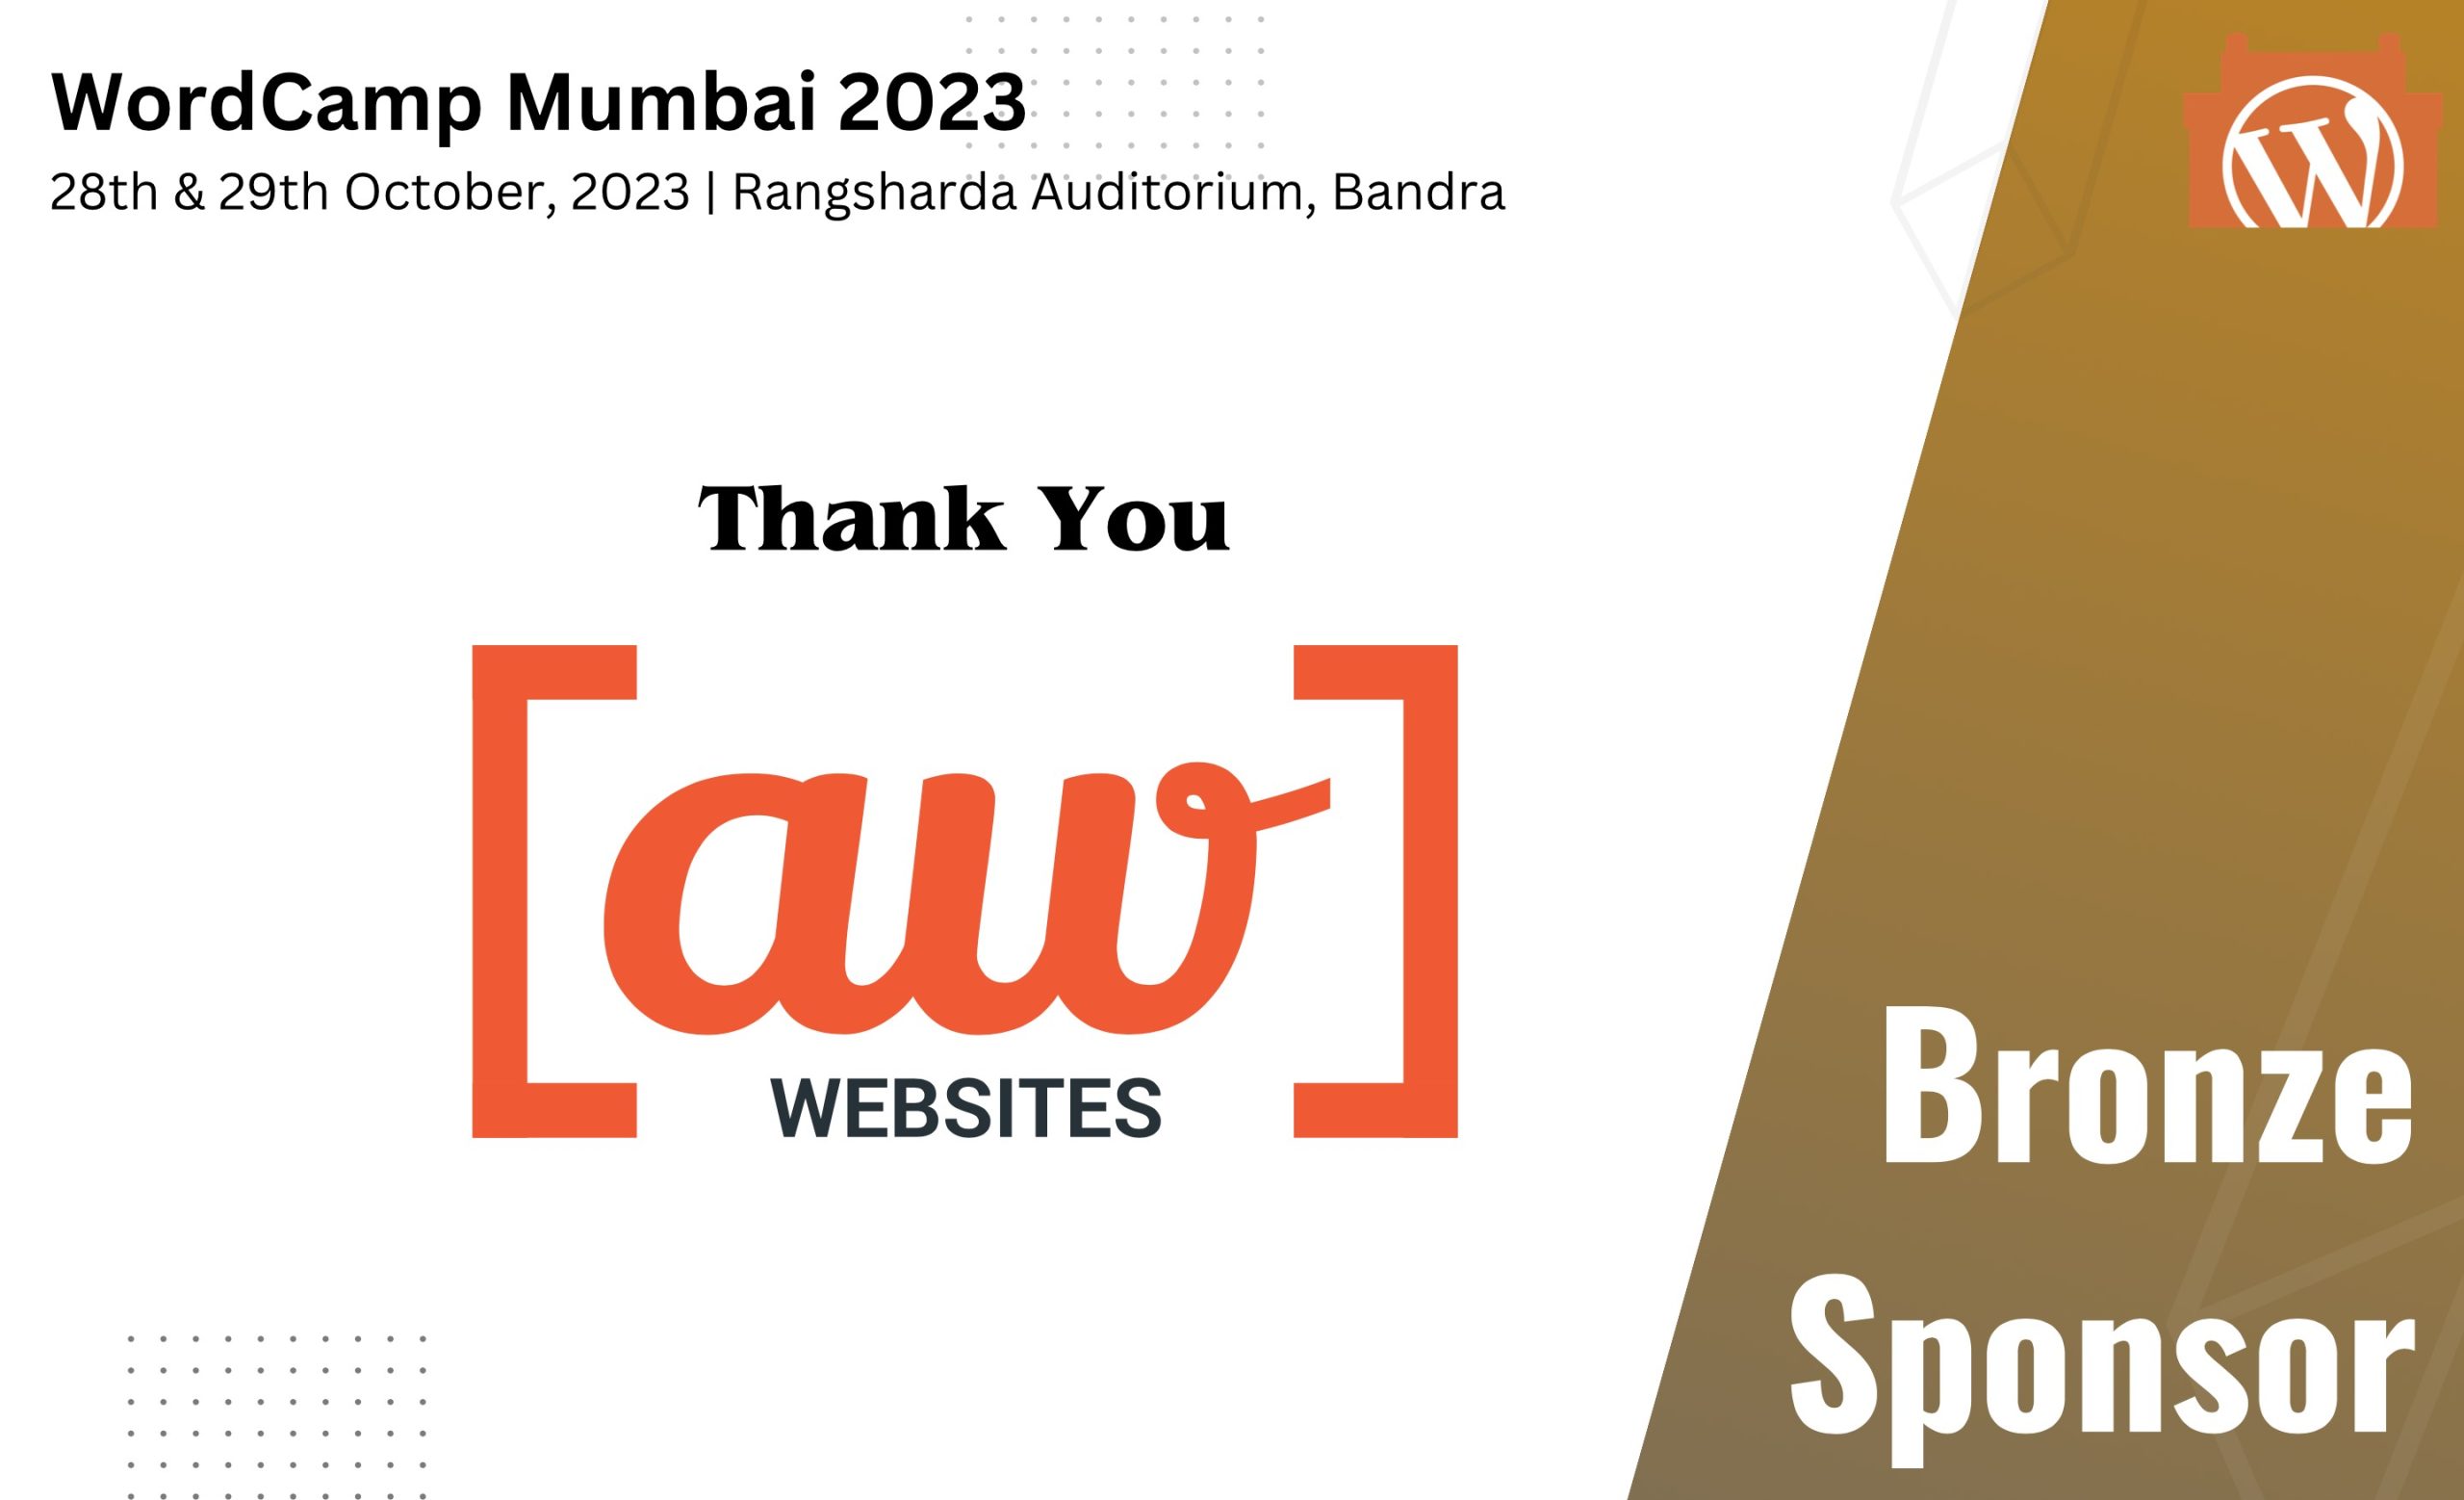 Thank You Awesome Websites, for being our Bronze Sponsor